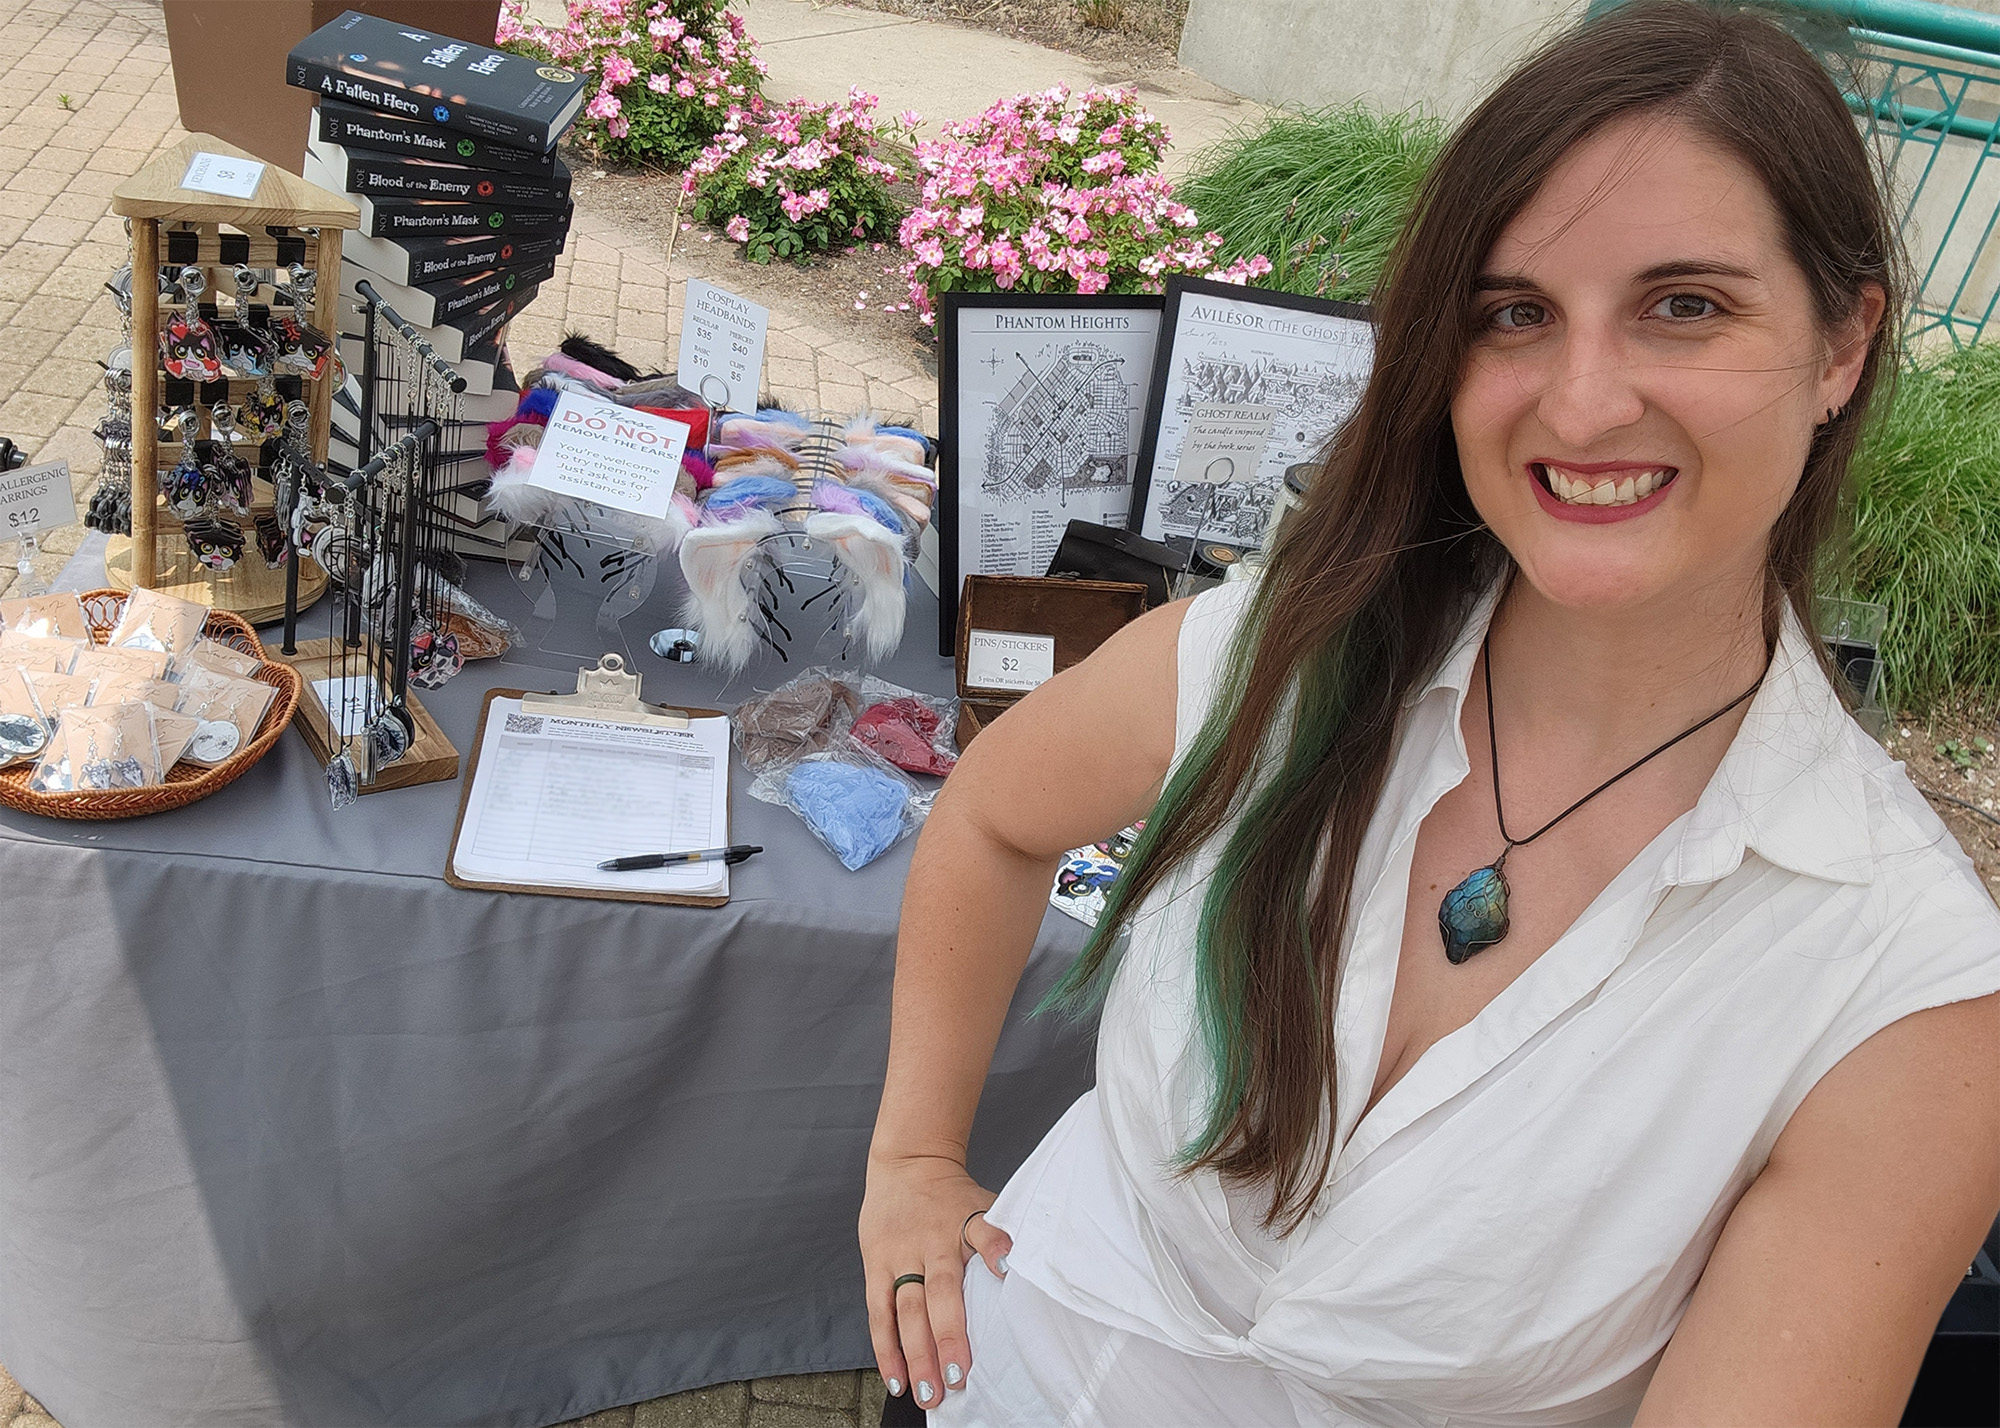 Author and artist Sara A. Noe standing in front of her booth at an outdoor market